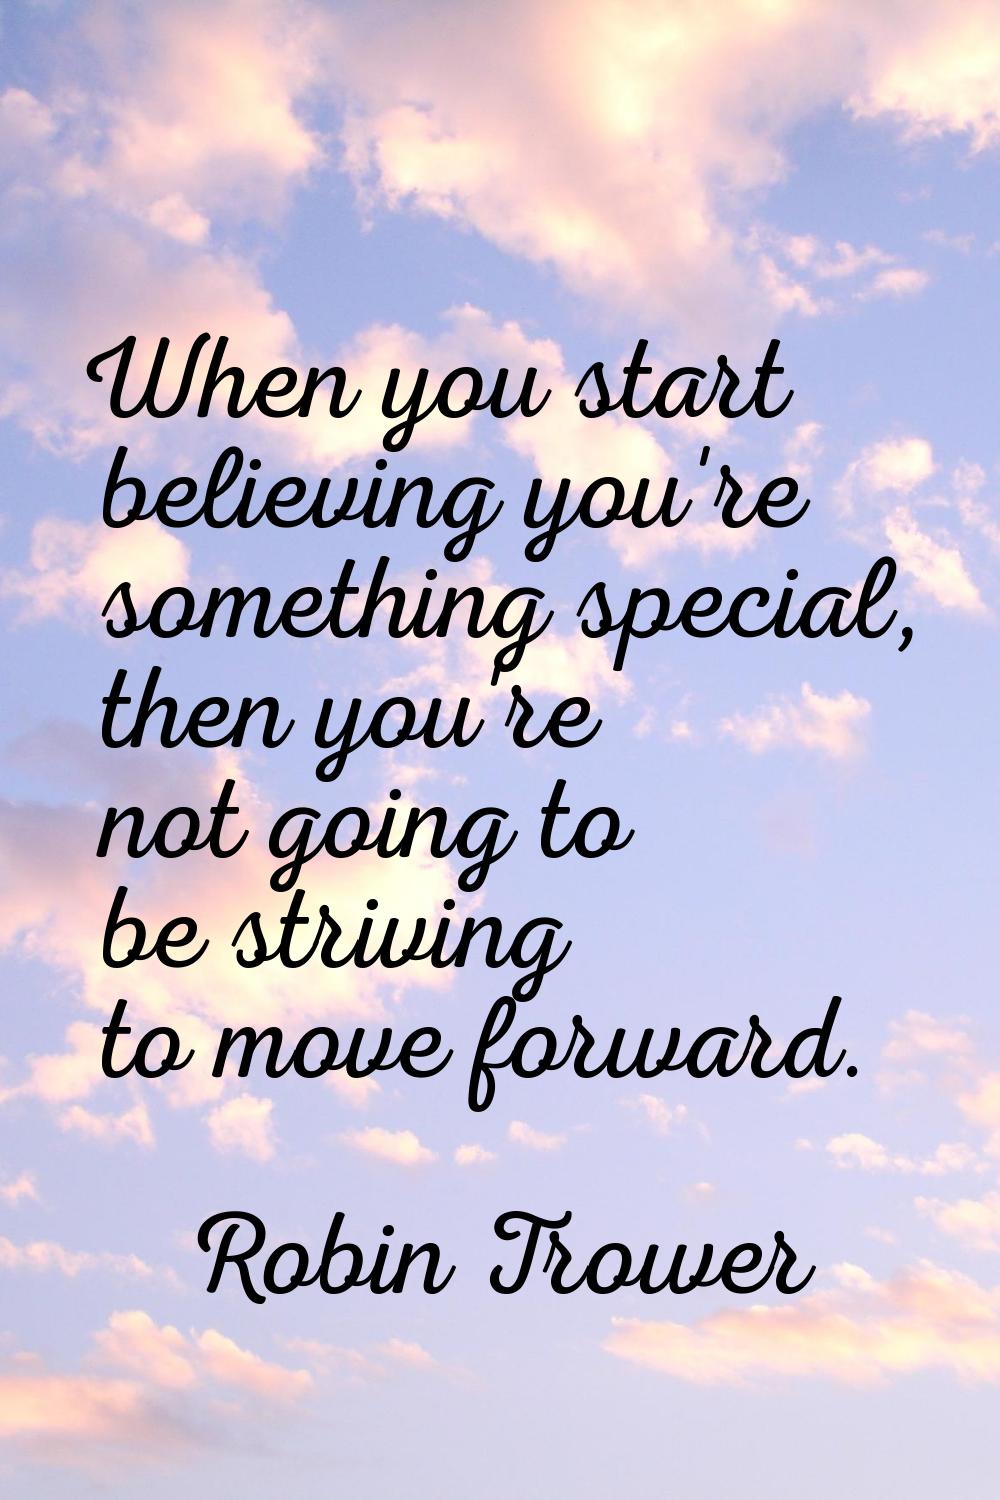 When you start believing you're something special, then you're not going to be striving to move for